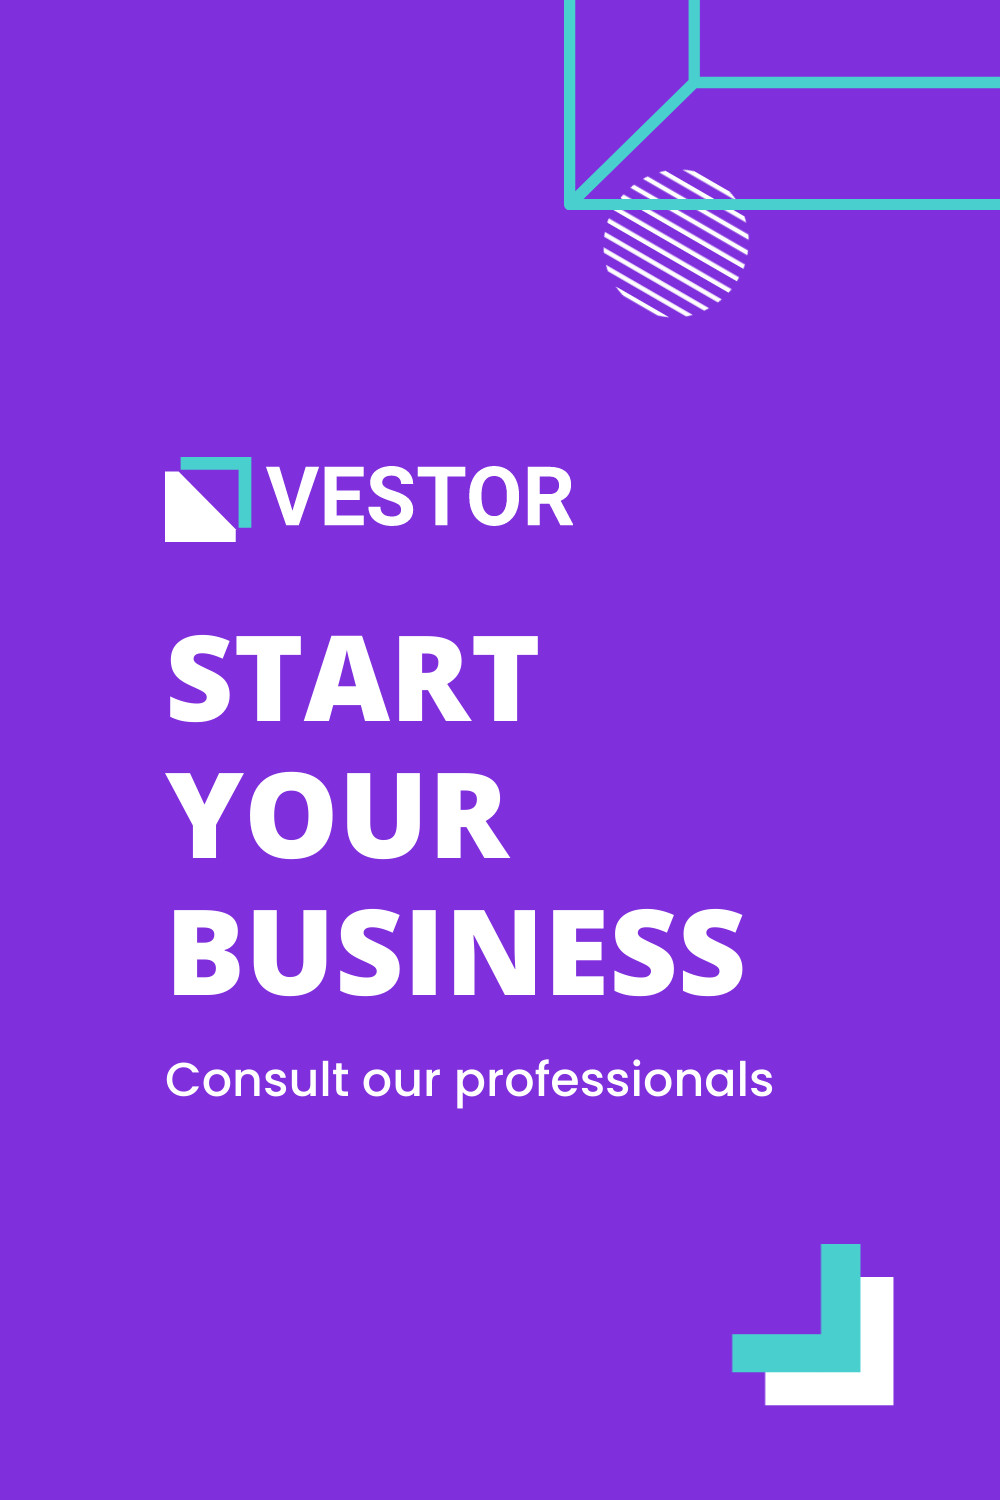 Best Choice to Start Your Business 